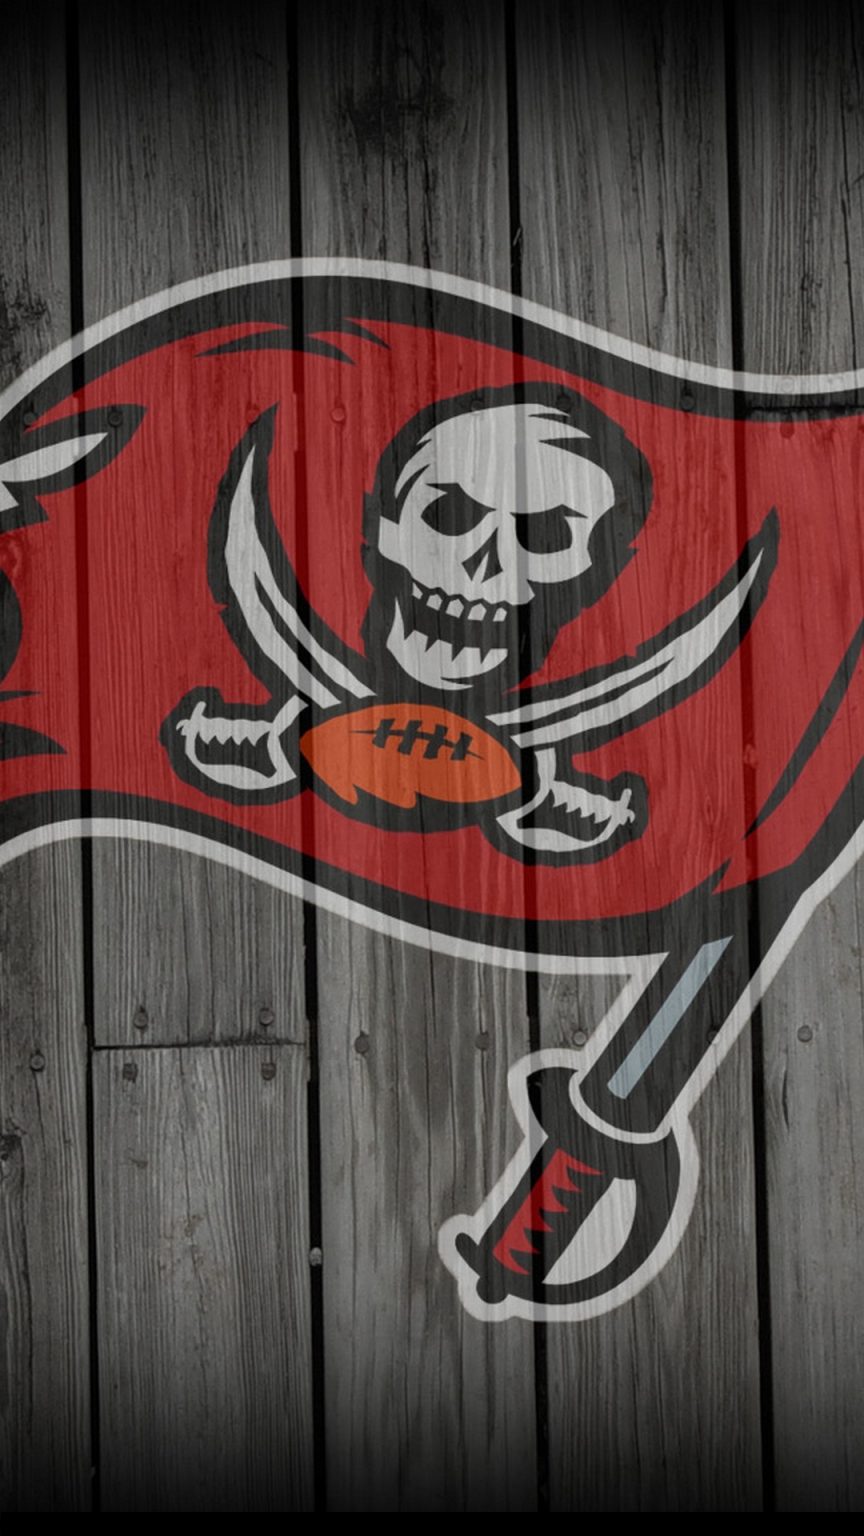 Tampa Bay Buccaneers HD Wallpaper For iPhone - 2022 NFL Football Wallpapers